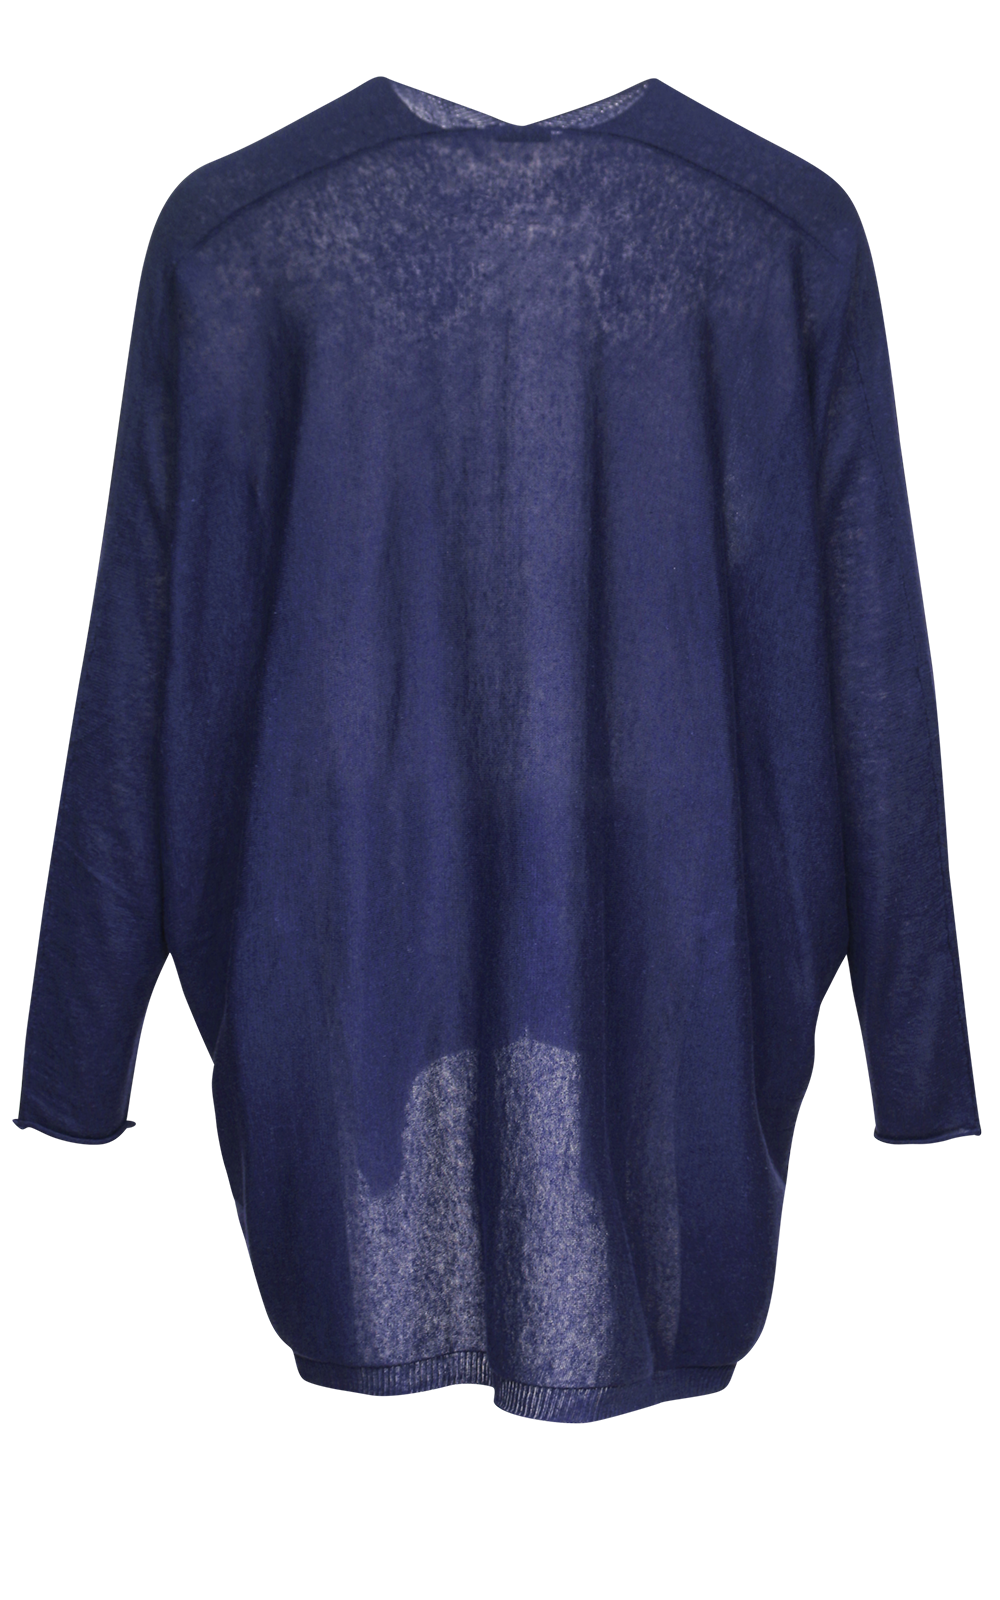 Solicitude Tunic product photo.